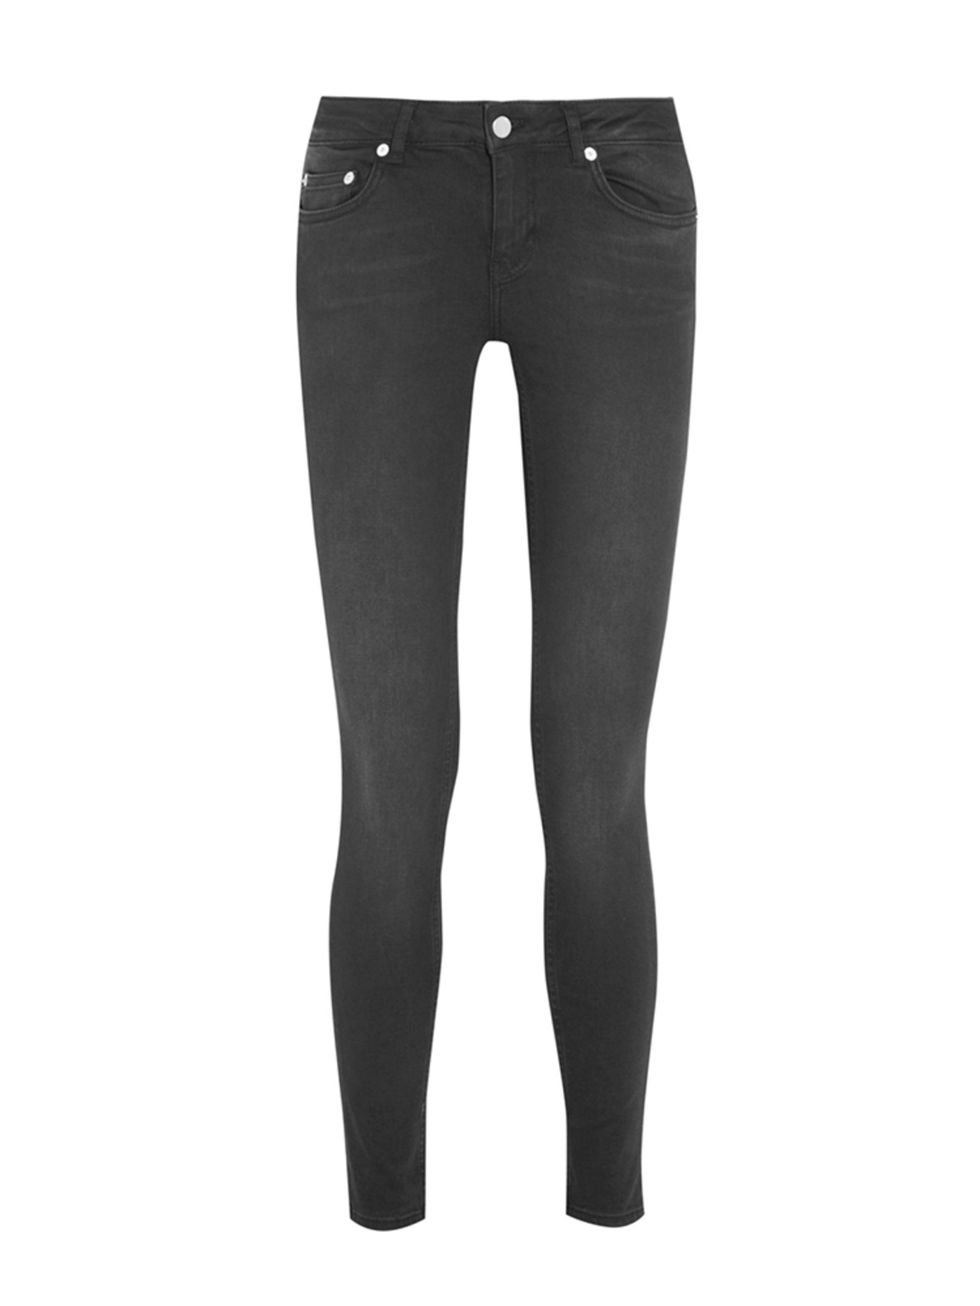 <p><a href="http://www.net-a-porter.com/product/453978/BLK_DNM/26-low-rise-skinny-jeans" target="_blank">BLK DNM</a> jeans, £130</p>